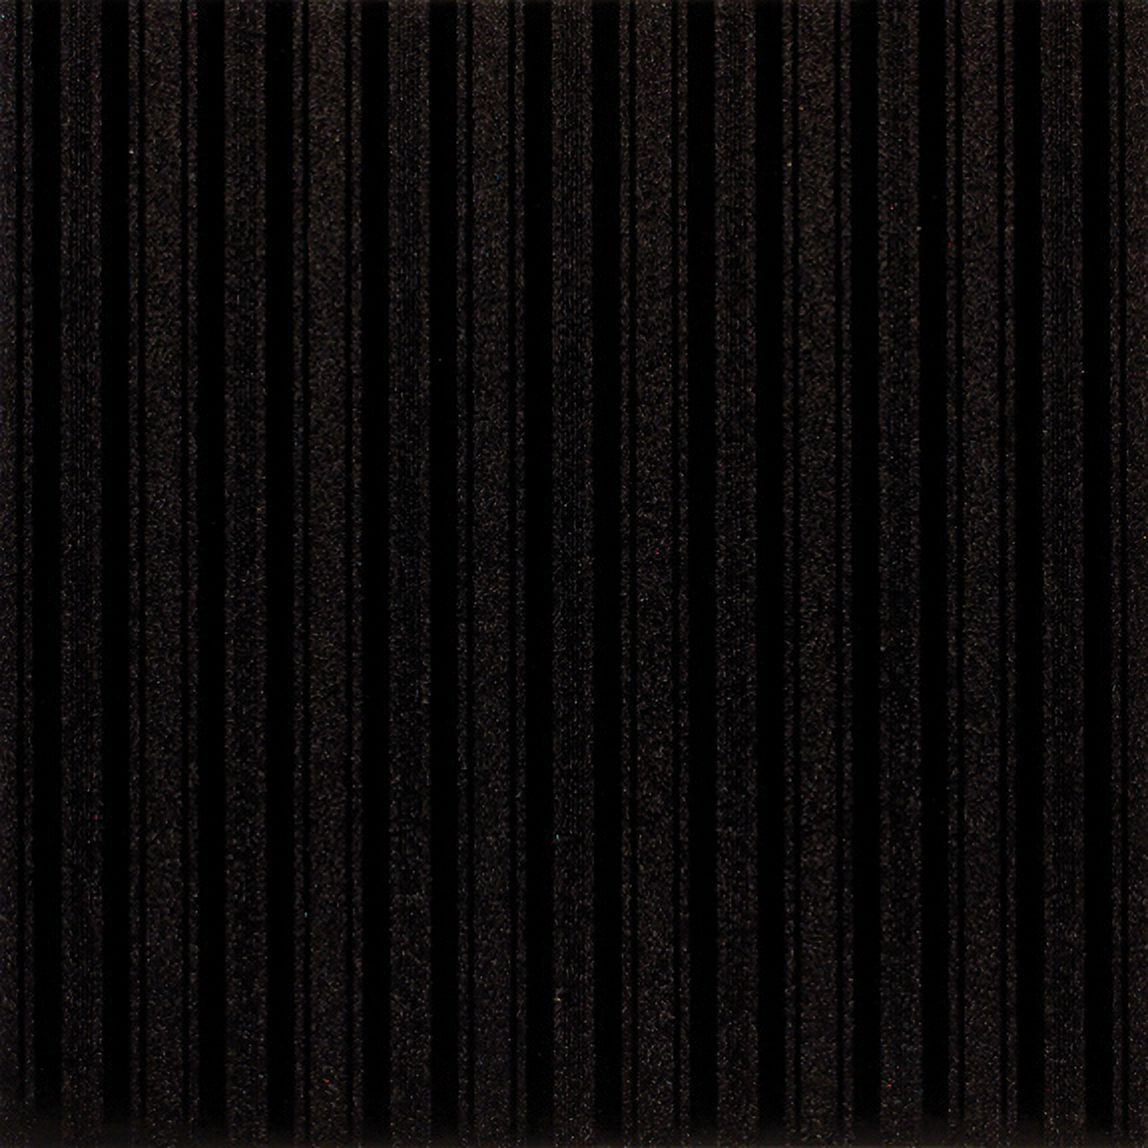 Buy Black Glitter Cardstock Online. COD. Low Prices. Free Shipping. Premium  Quality.